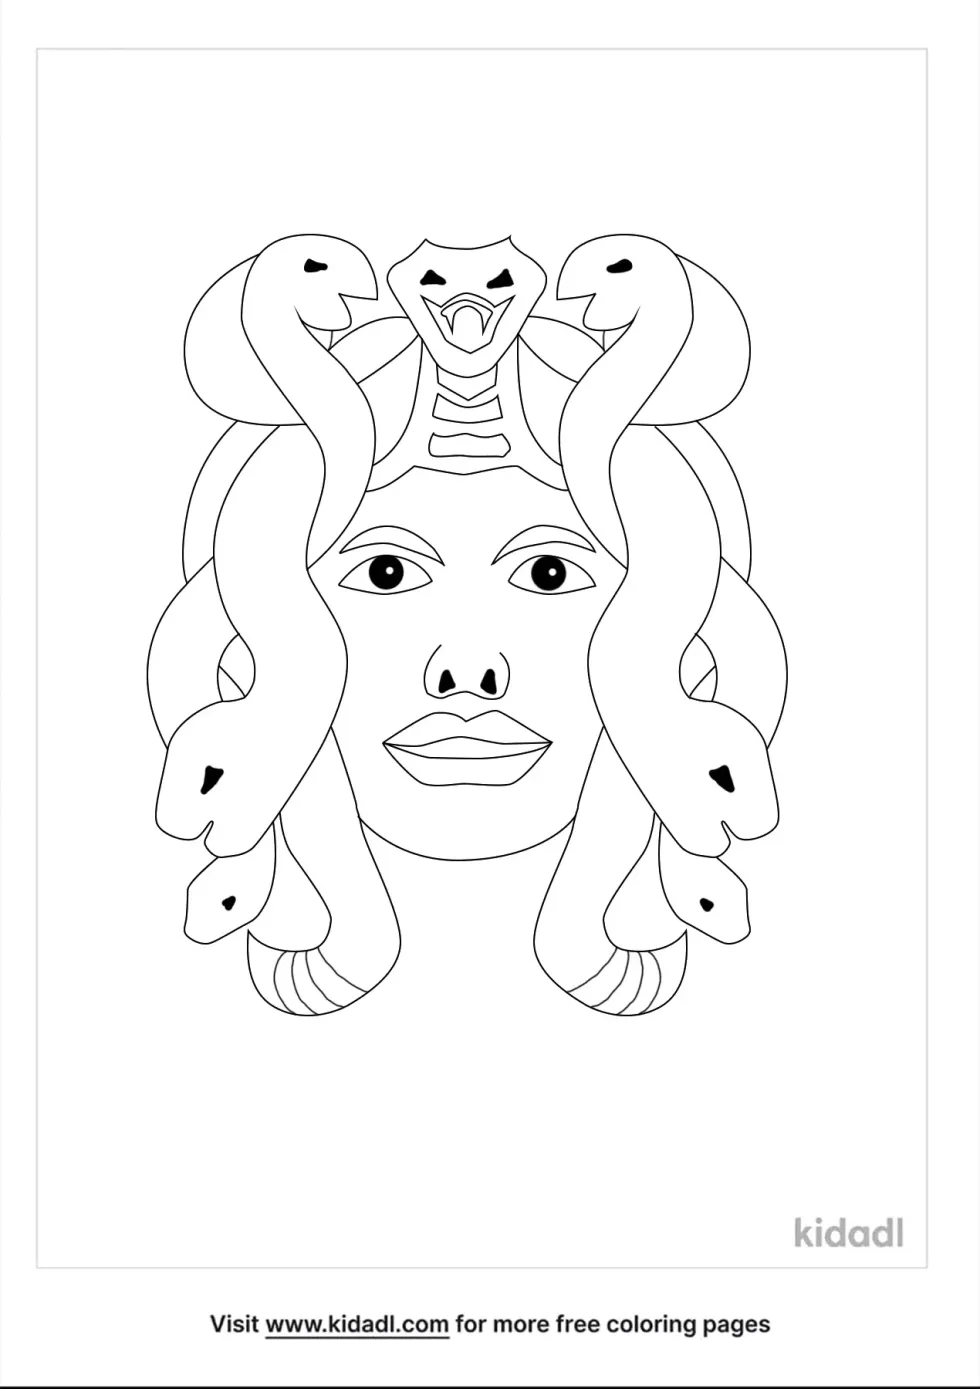 Medusa Head Coloring Page